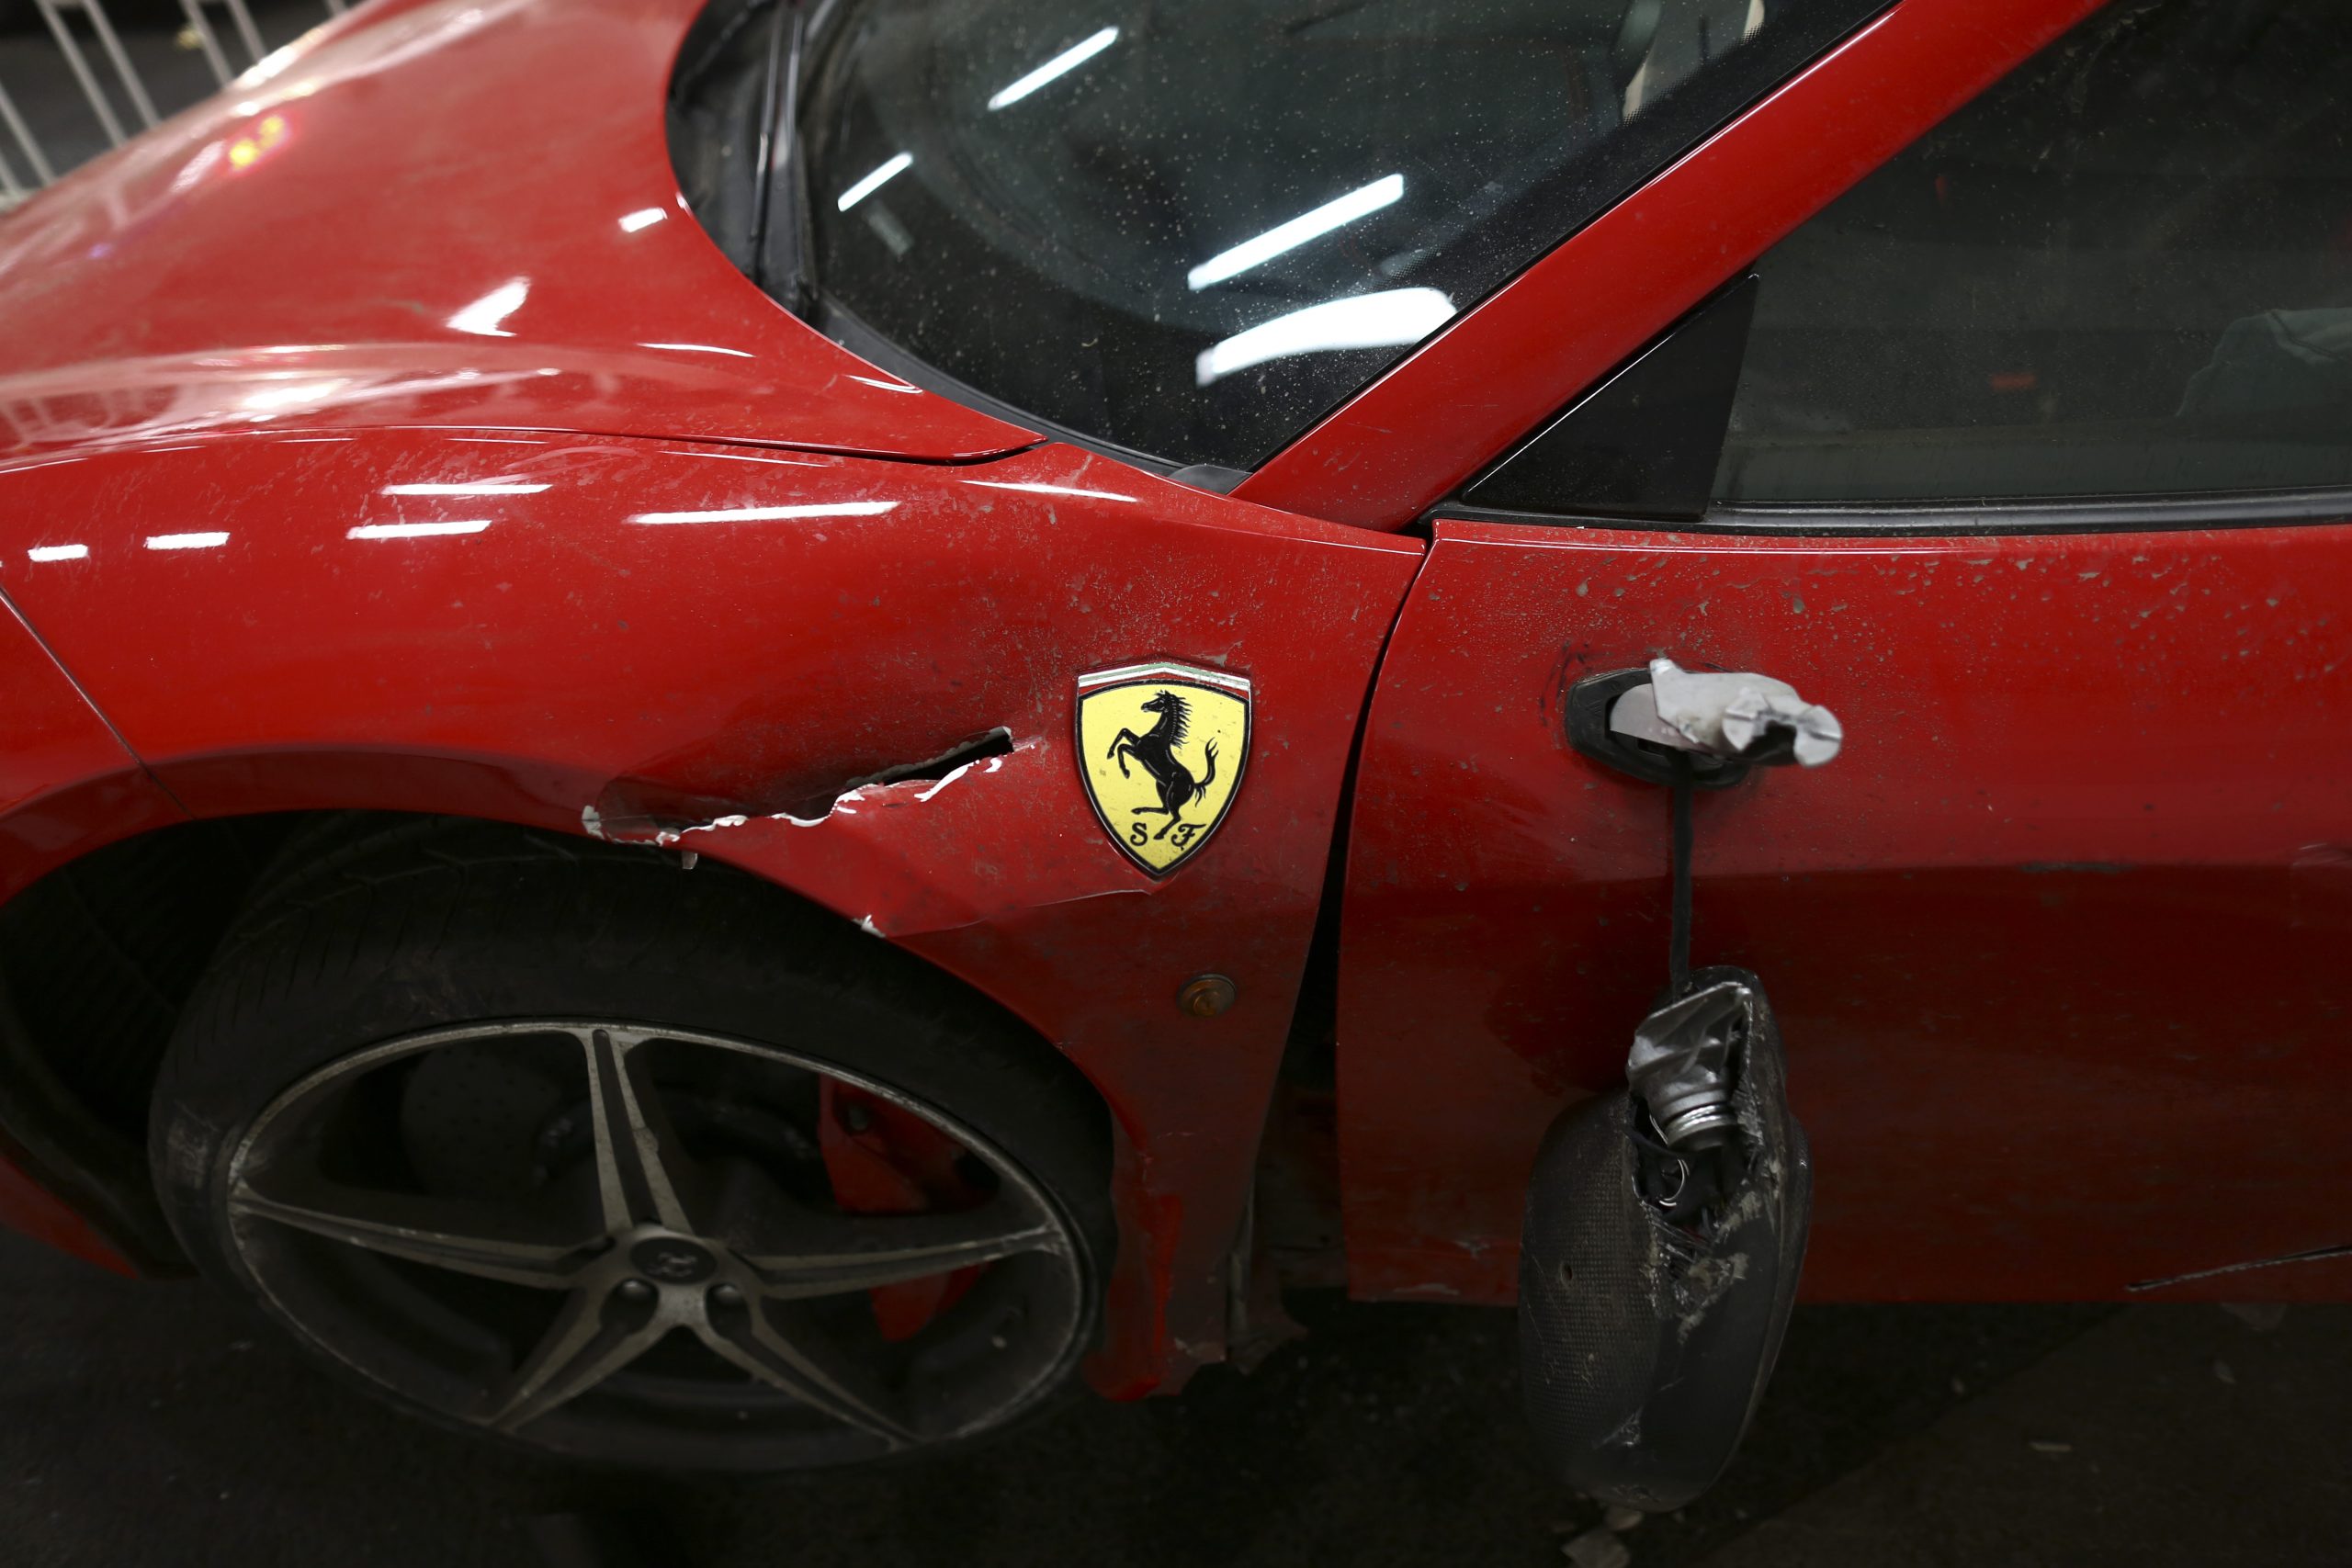 View of a damaged Ferrari after collision